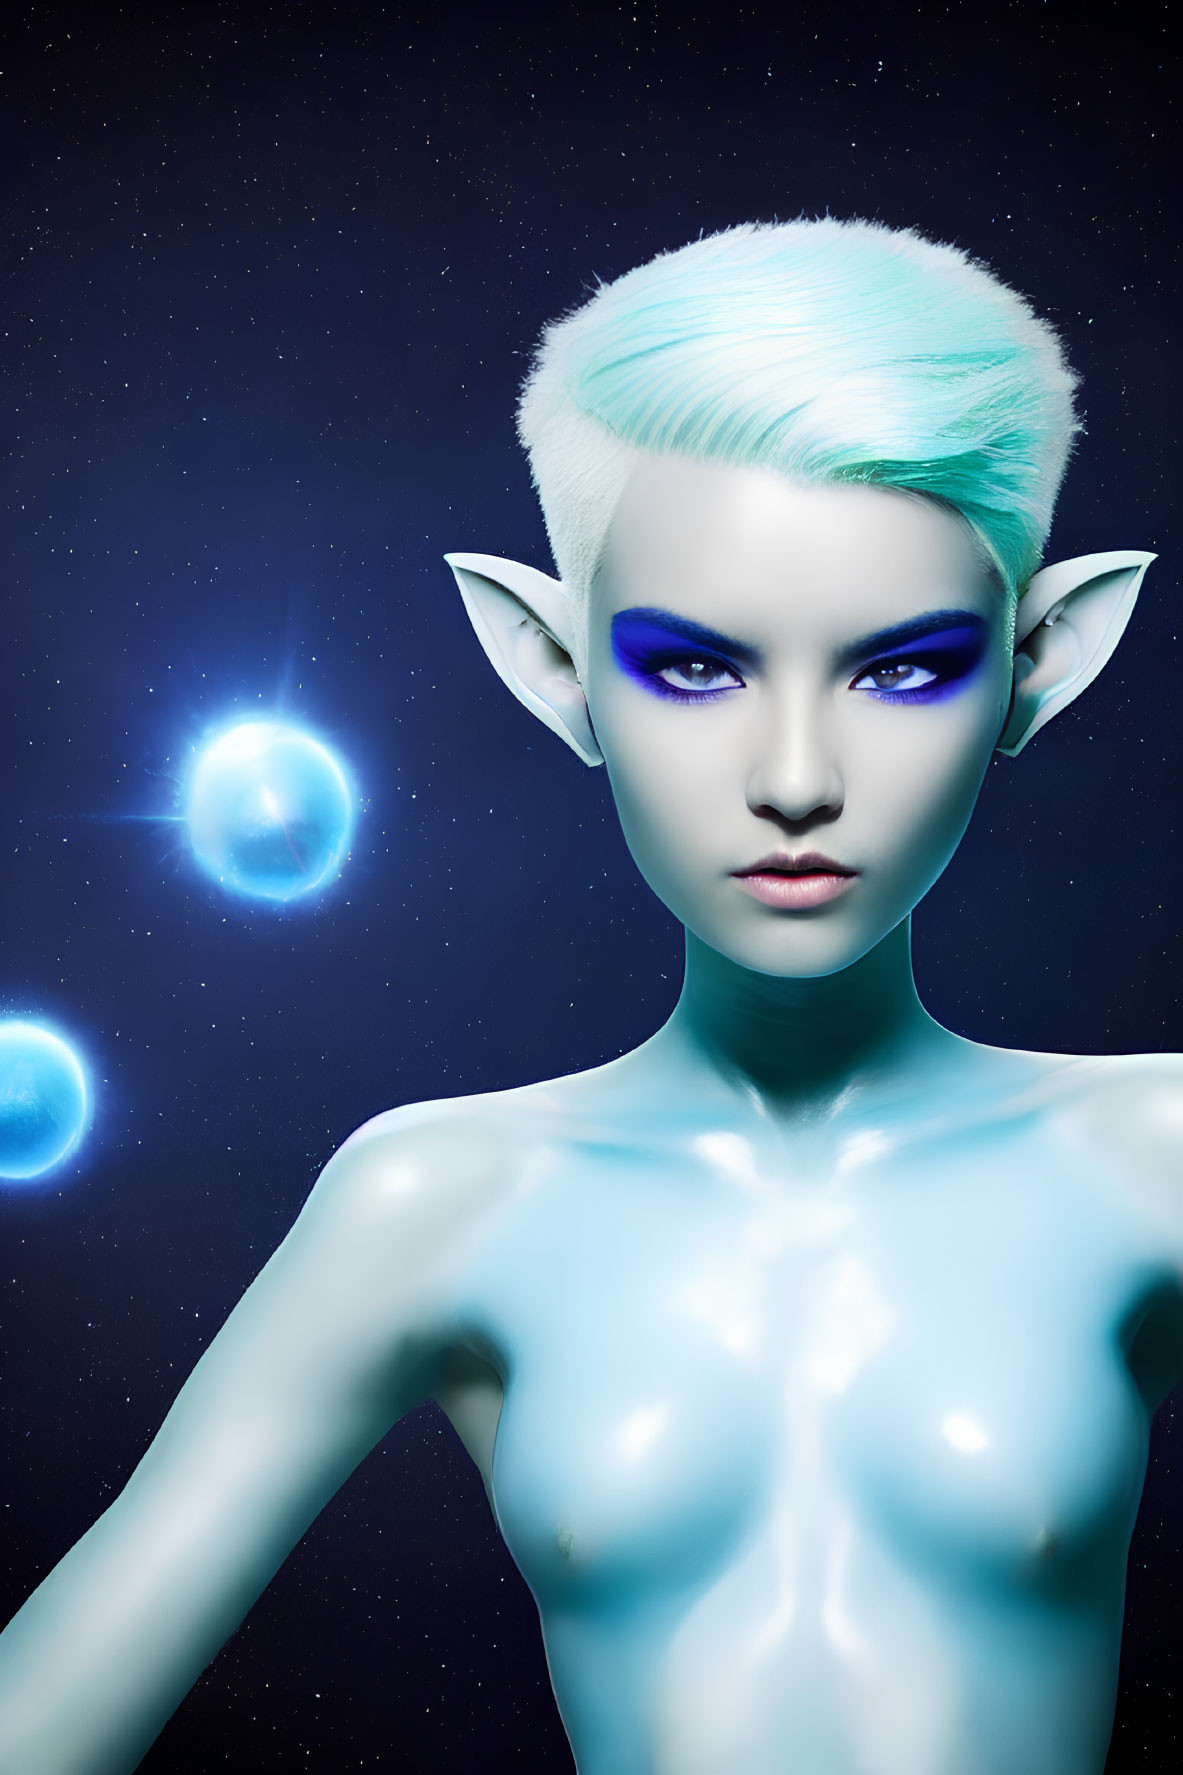 Blue-skinned humanoid alien in space with blue orbs